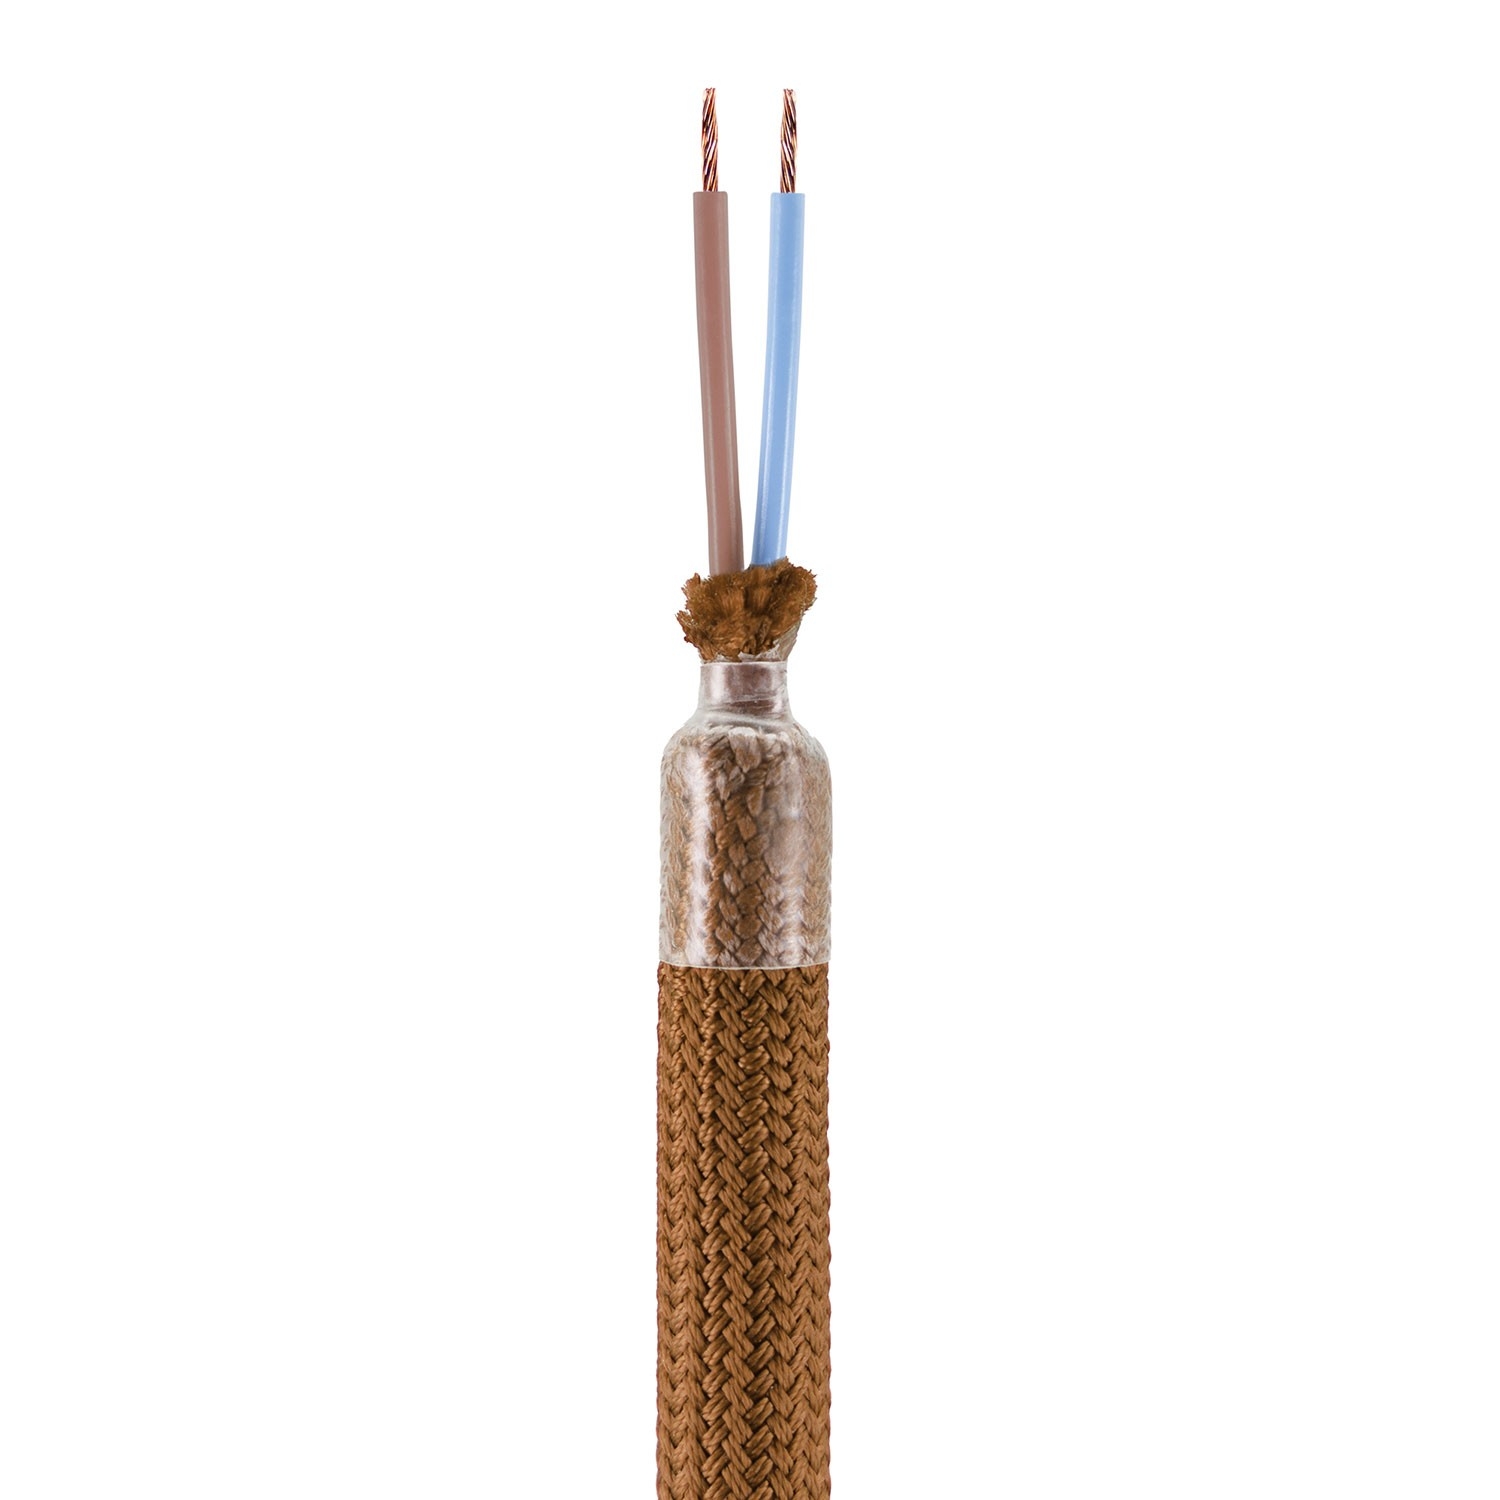 Kit Creative Flex flexible tube covered in Brown RM13 fabric with metal terminals